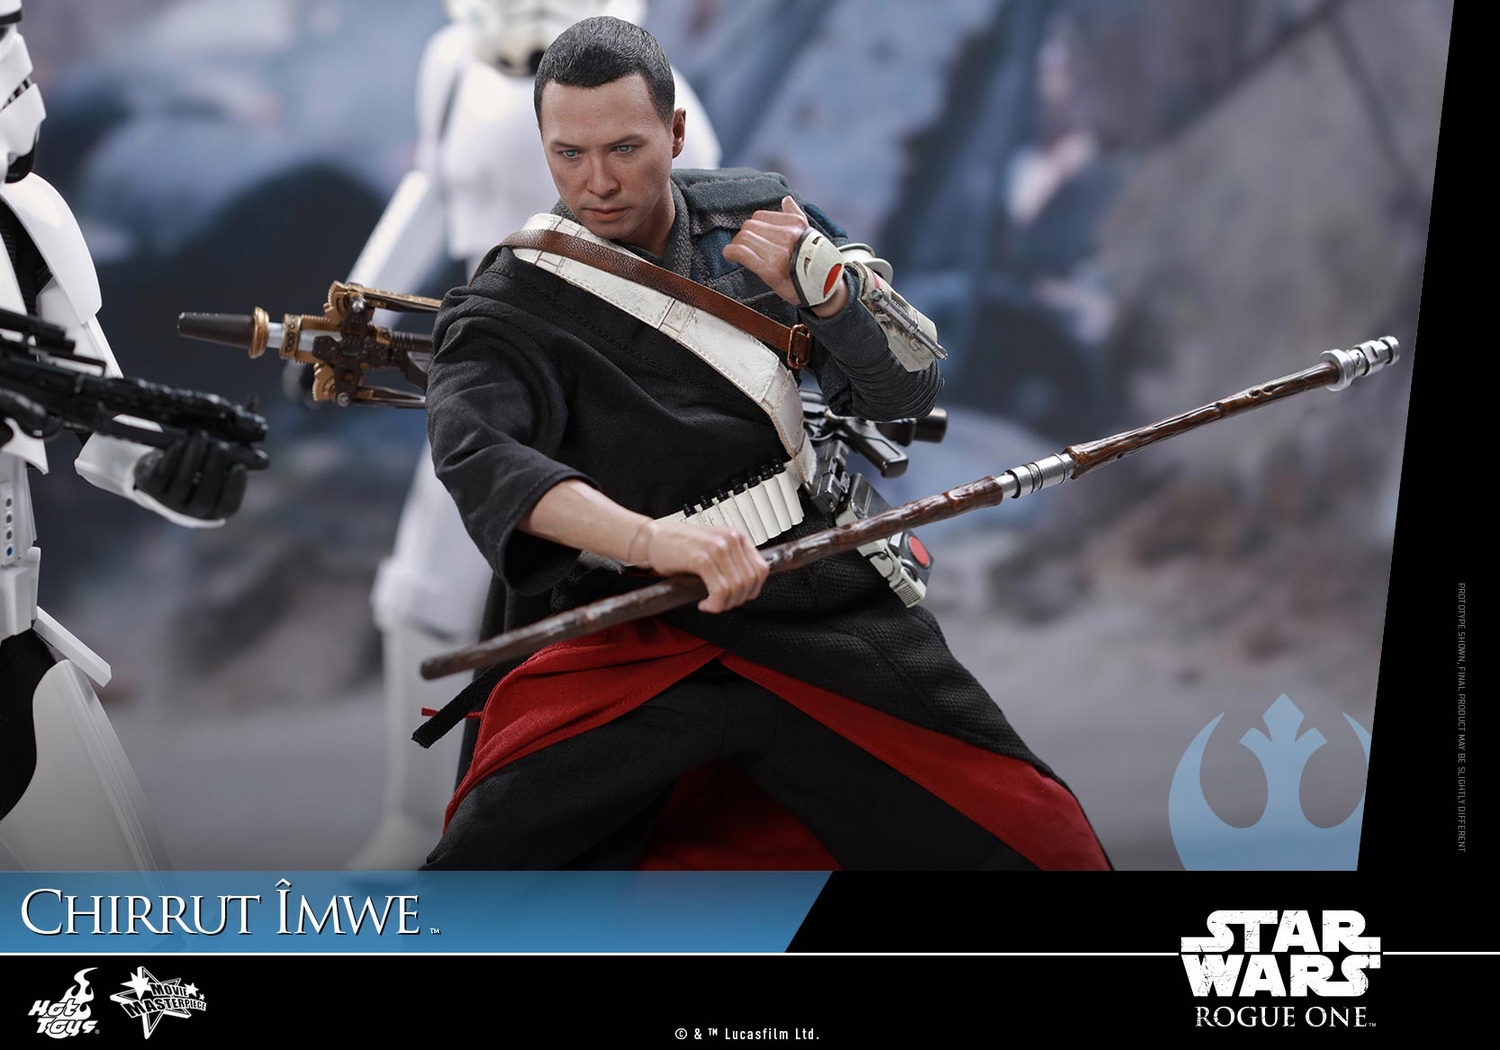 hot-toys-rogue-one-chirrut-imwe-collectible-figure-112916-006.jpg